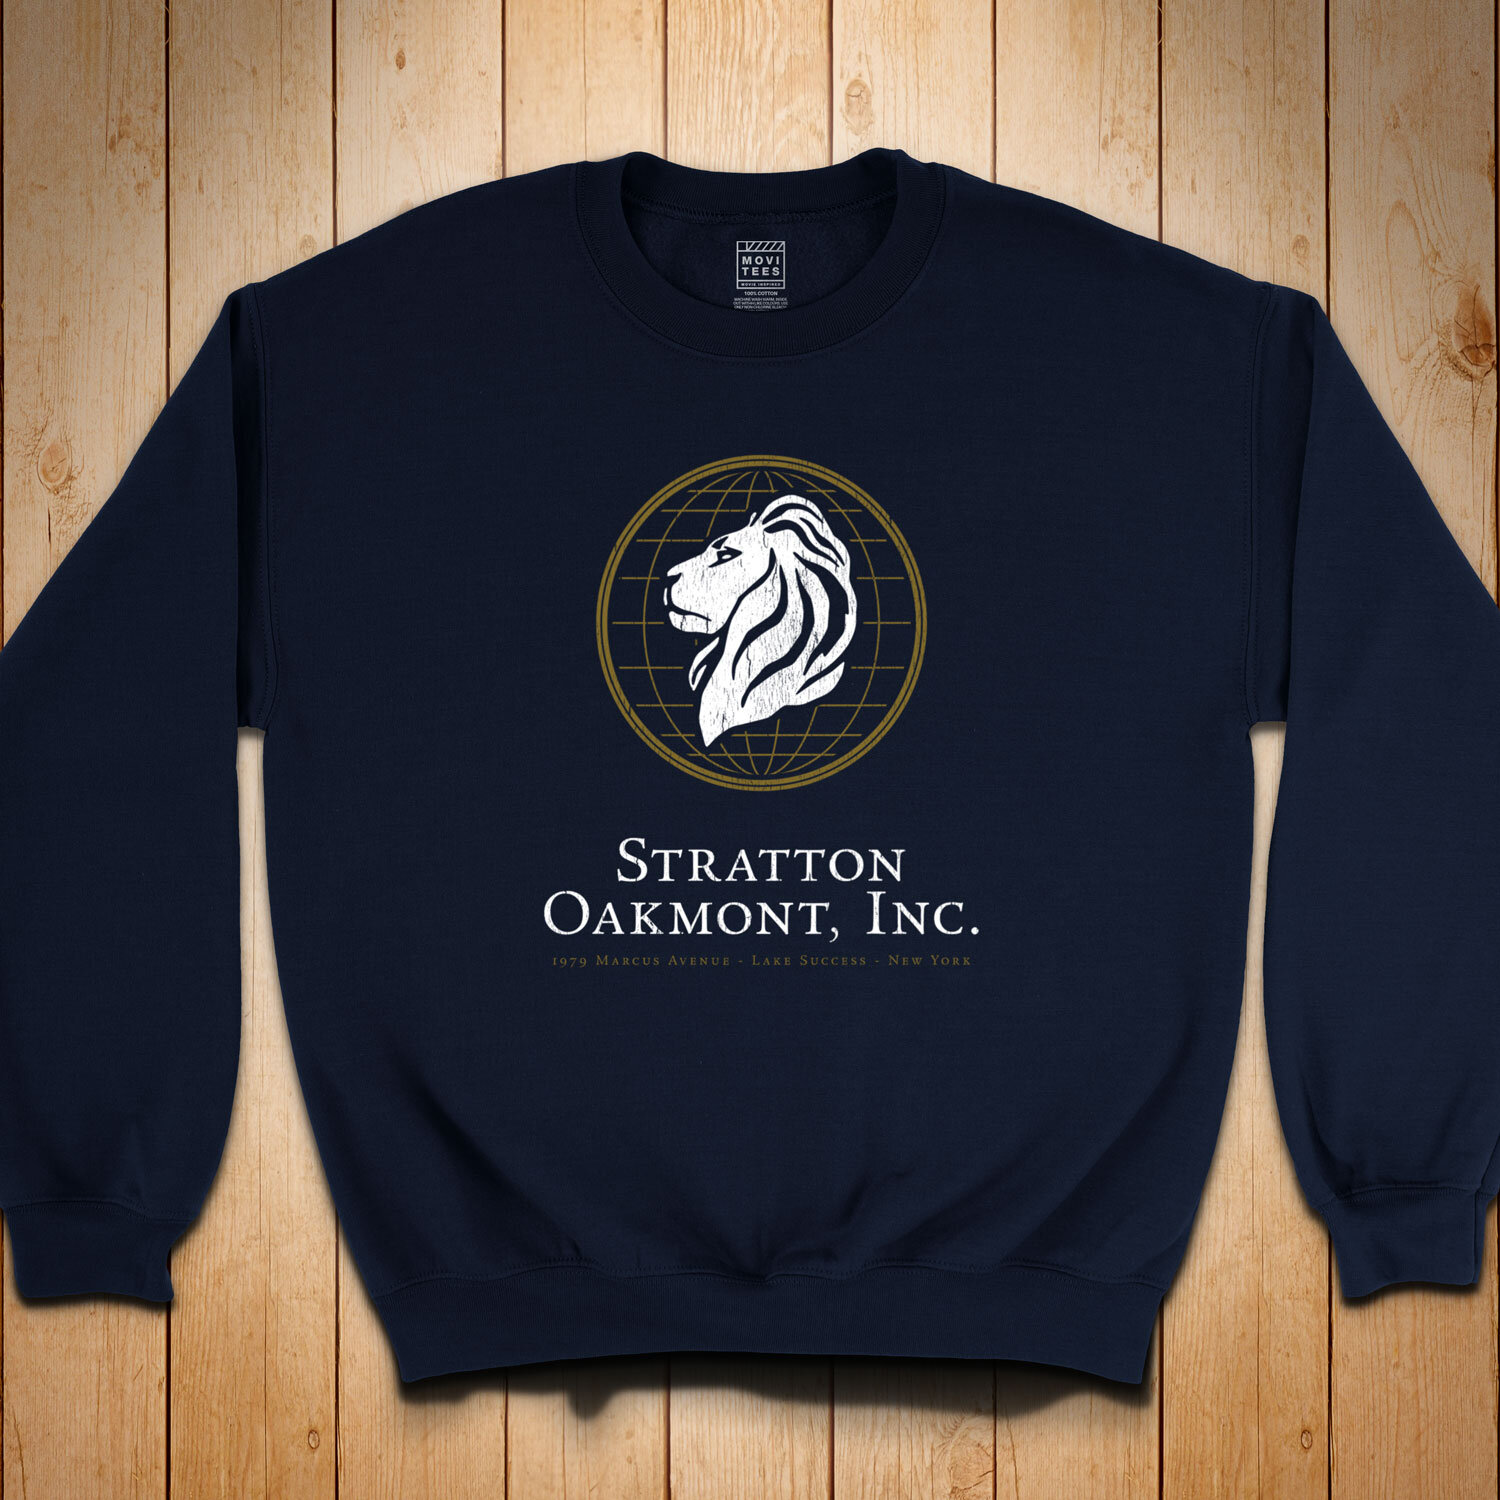 Stratton Oakmont, Inc. sweater inspired by The Wolf of Wall Street -  Sweatshirt — MoviTees